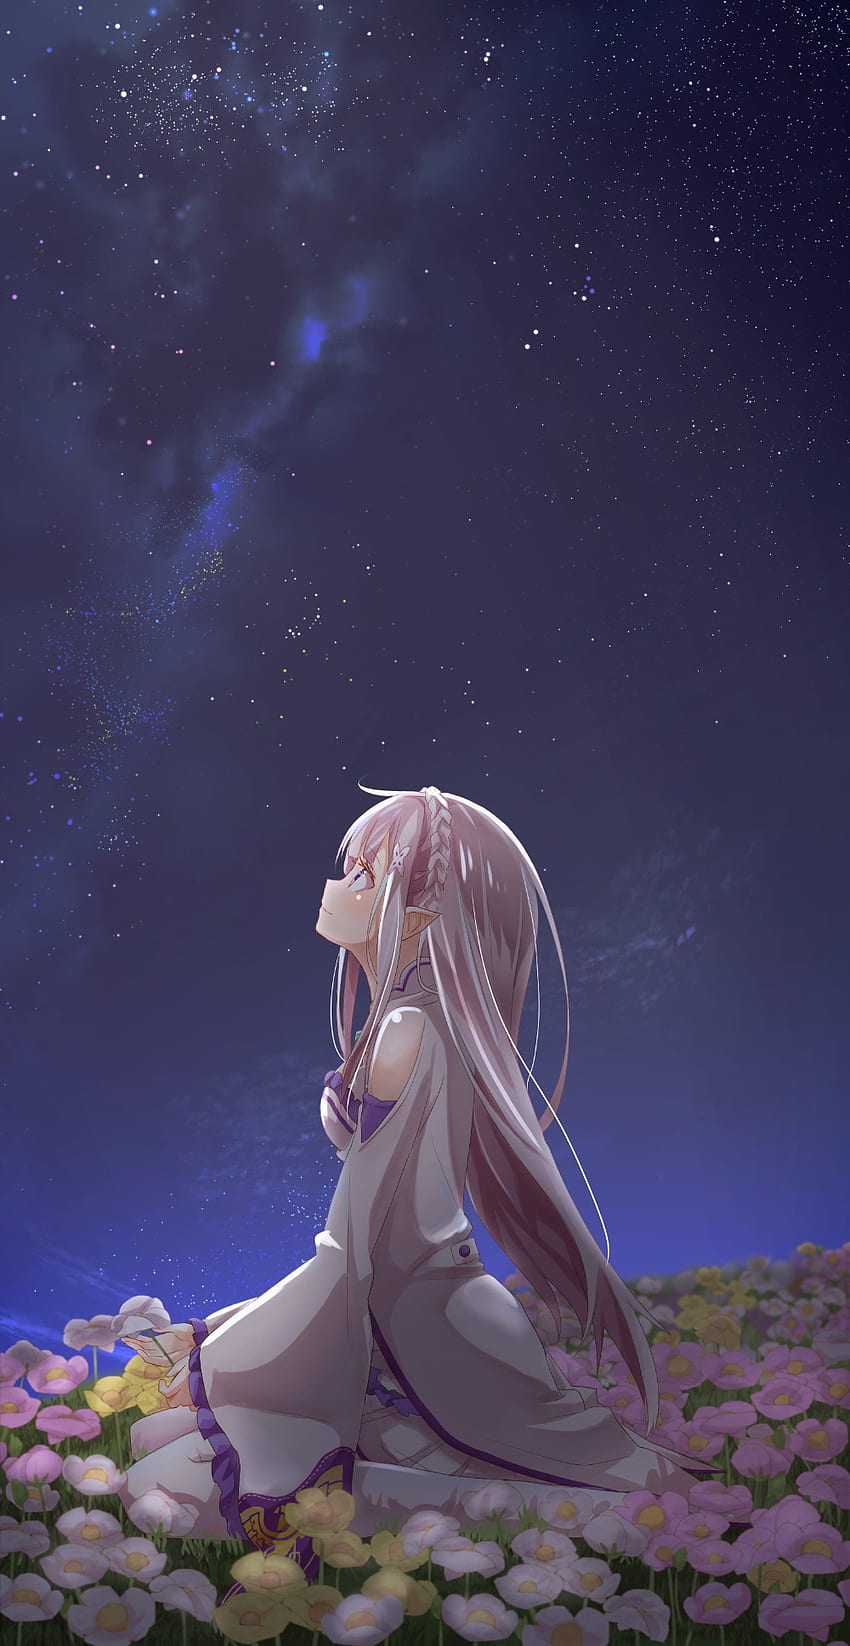 A girl sitting in the grass looking up at stars - 3D